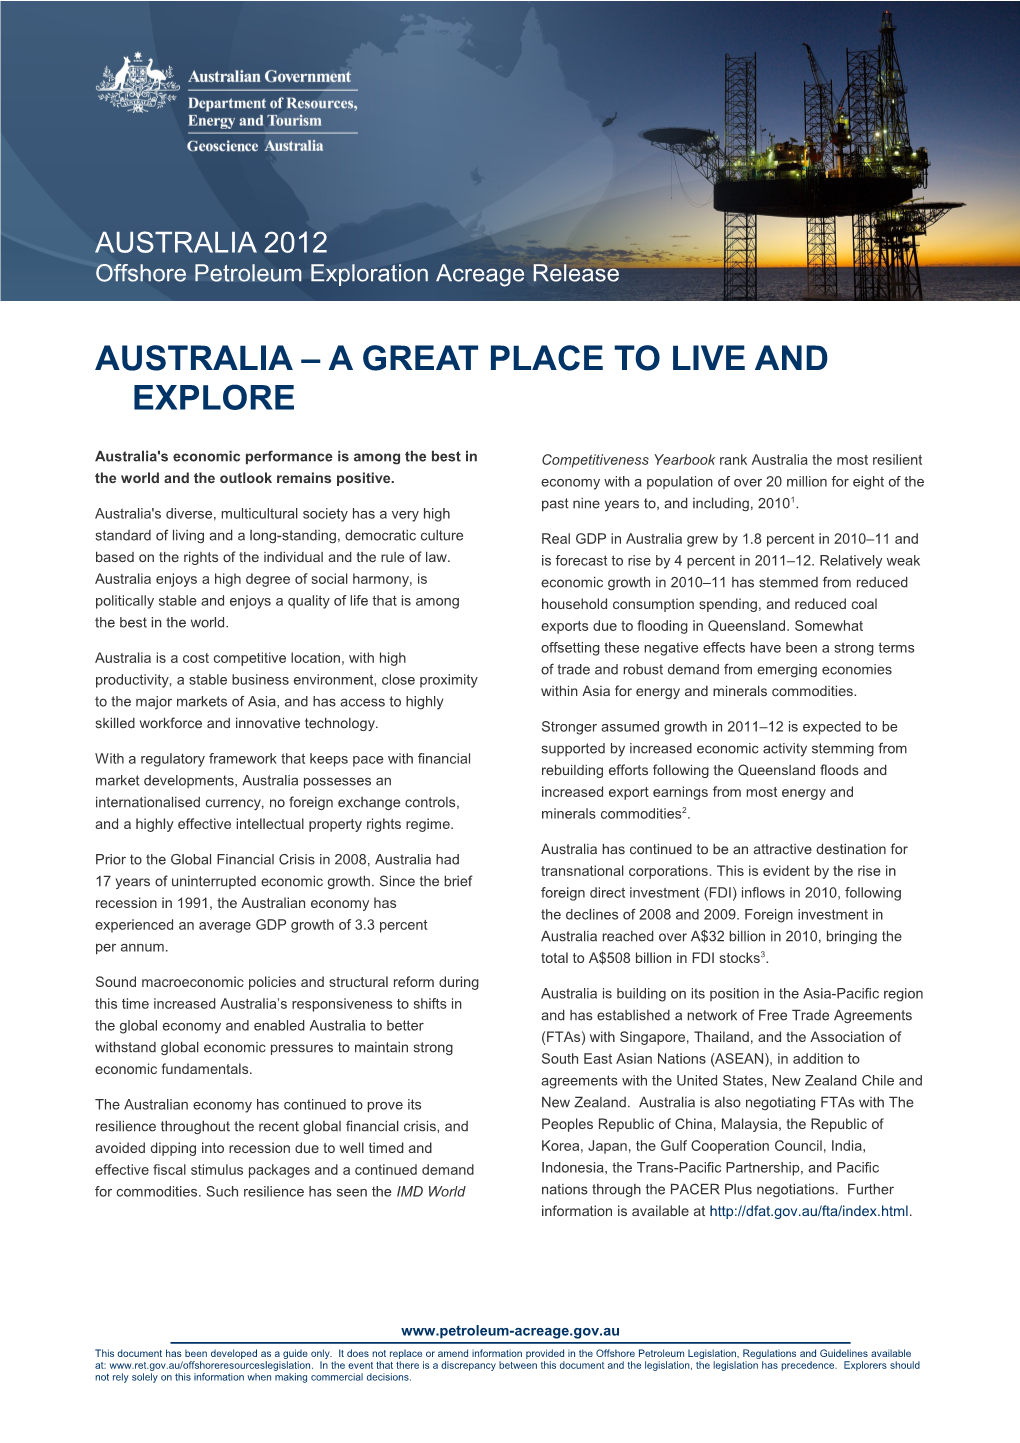 Australia a Great Place to Live and Explore